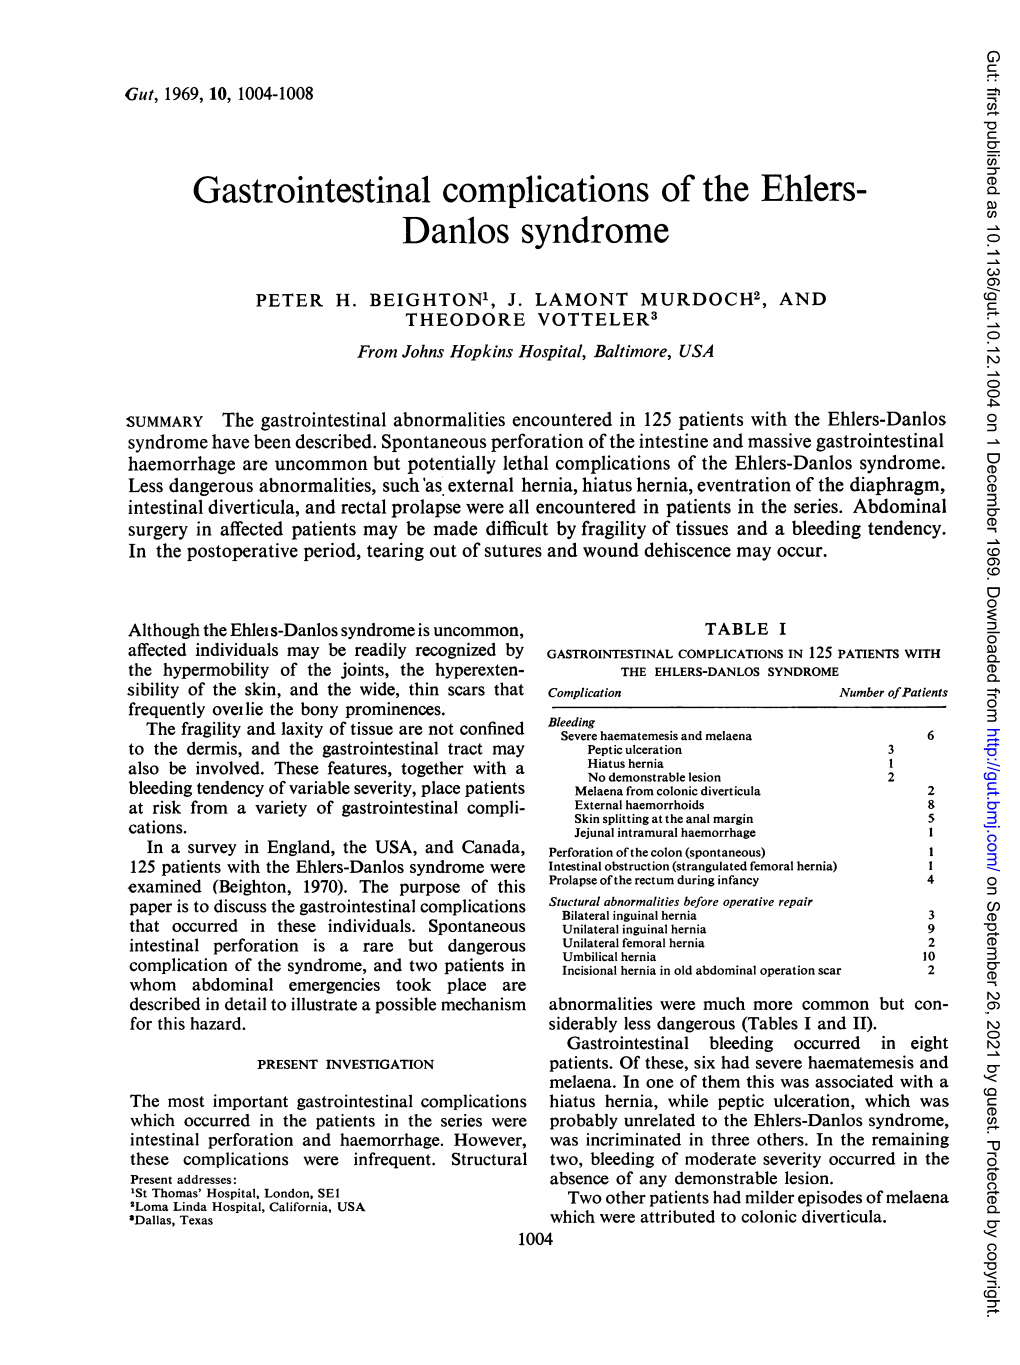 Gastrointestinal Complications of the Ehlers- Danlos Syndrome